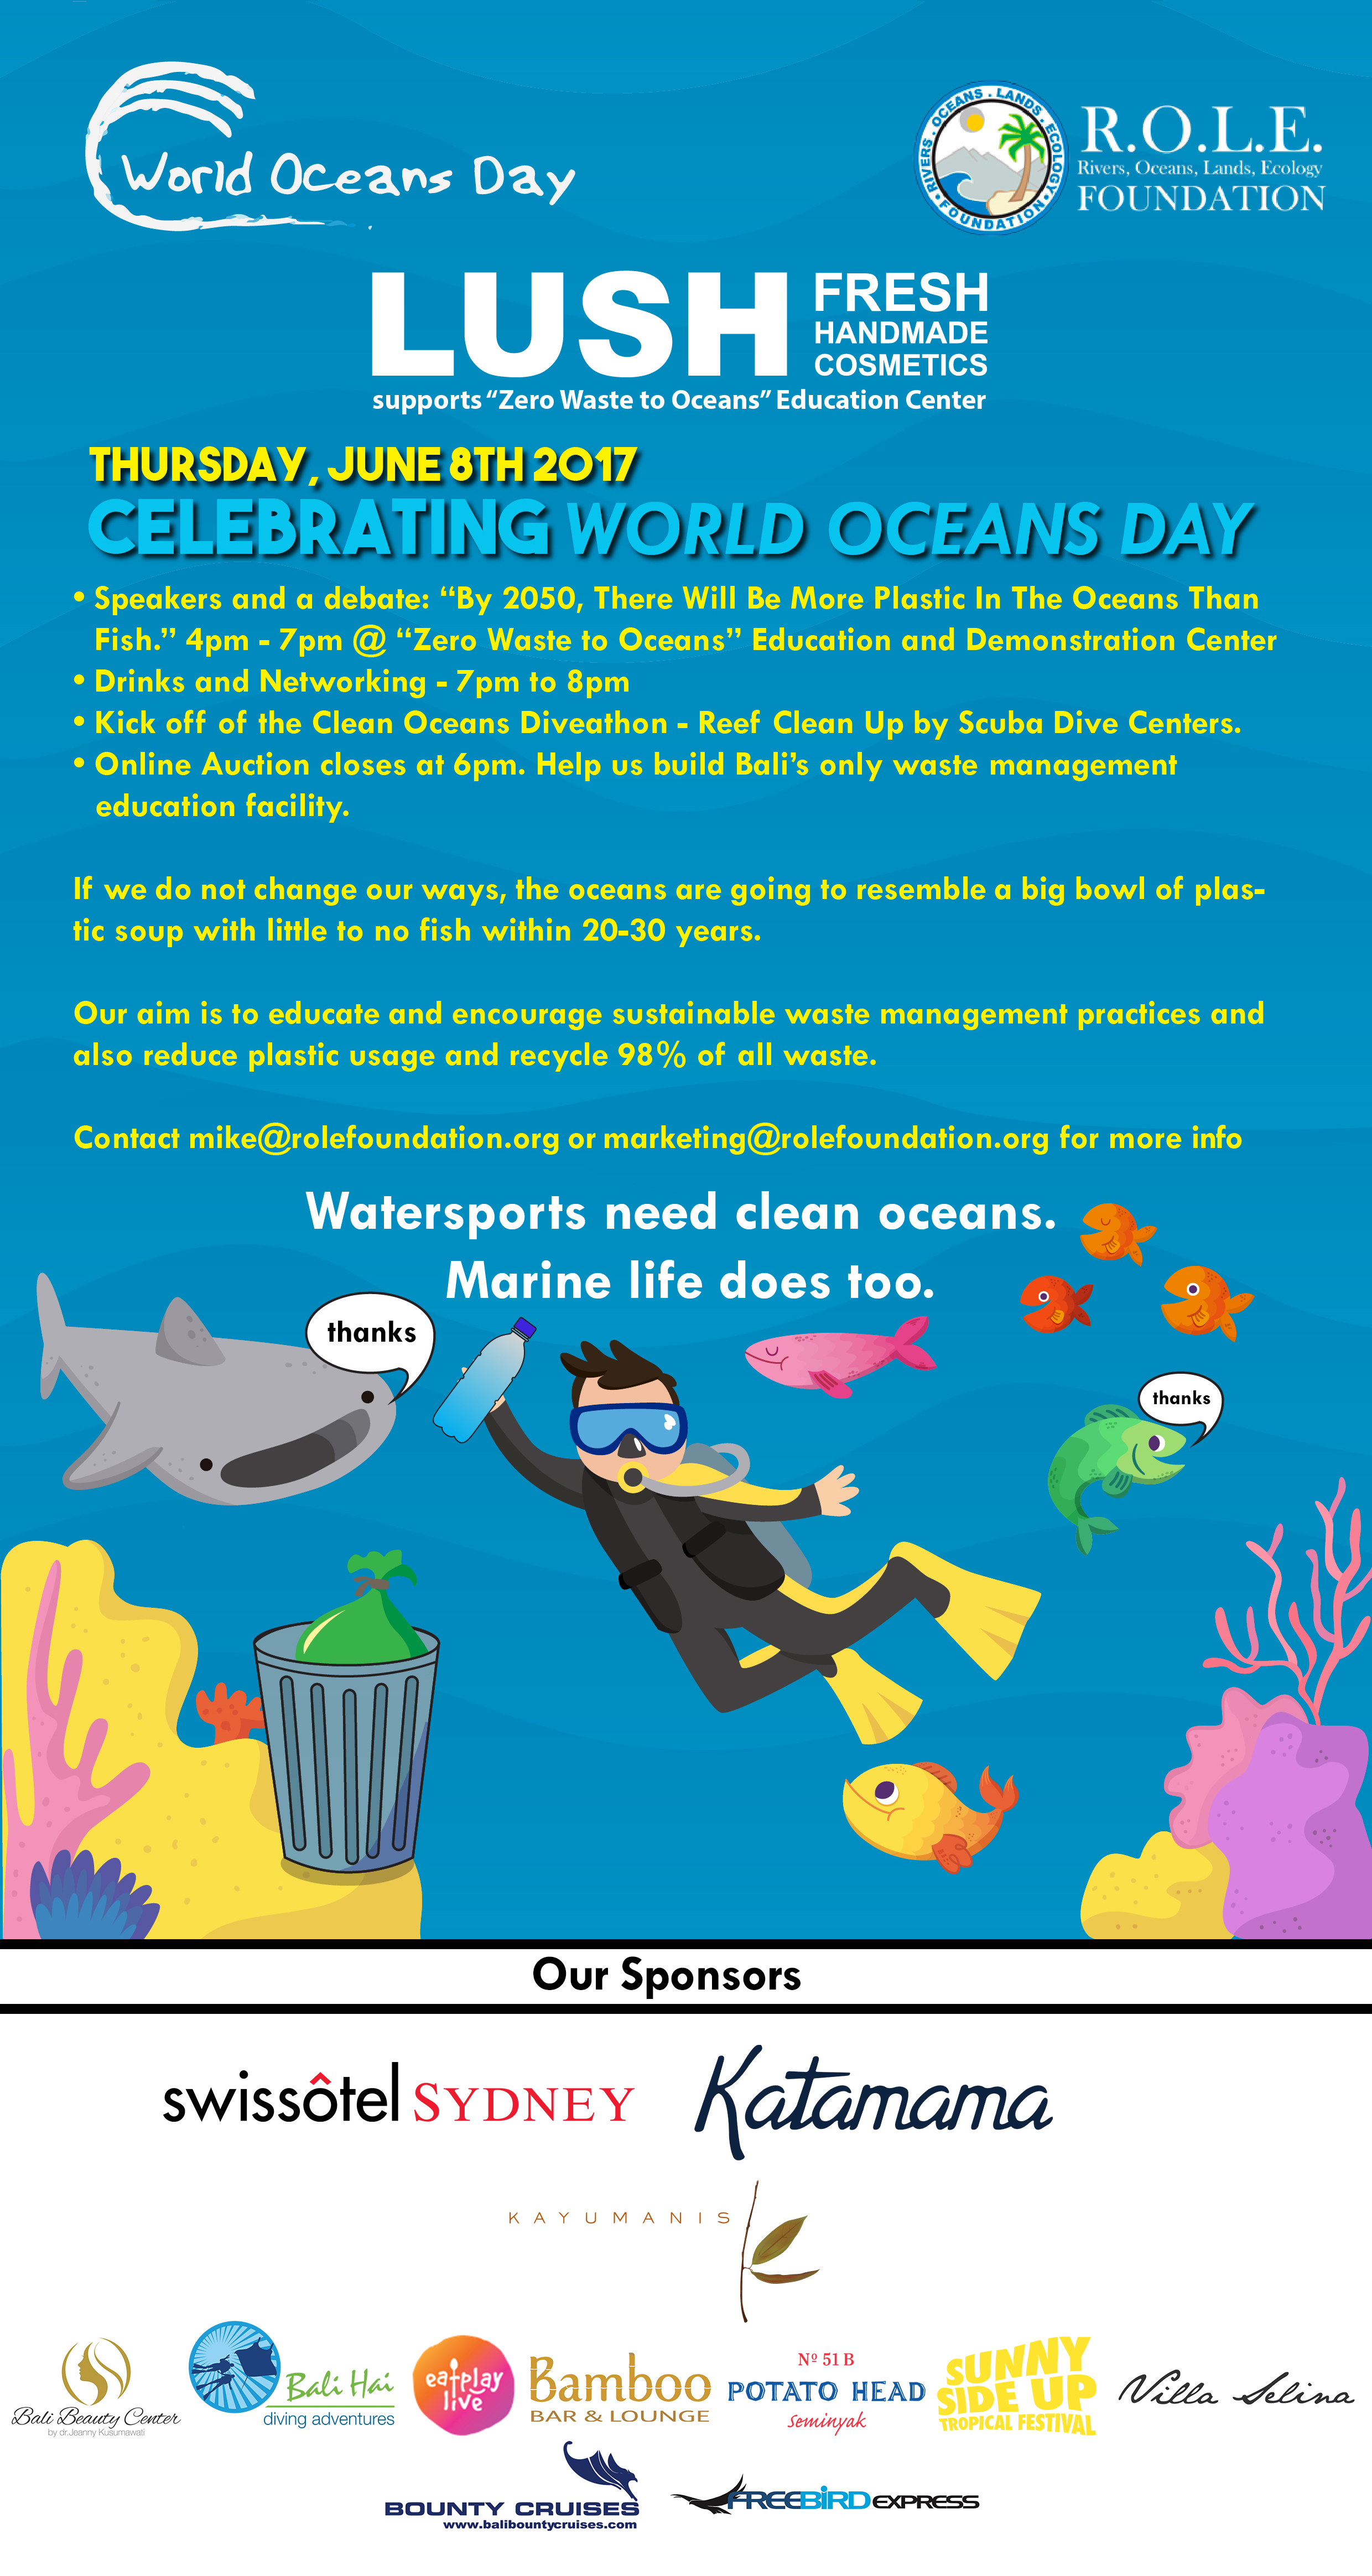 World Oceans Day Flyer and Sponsors